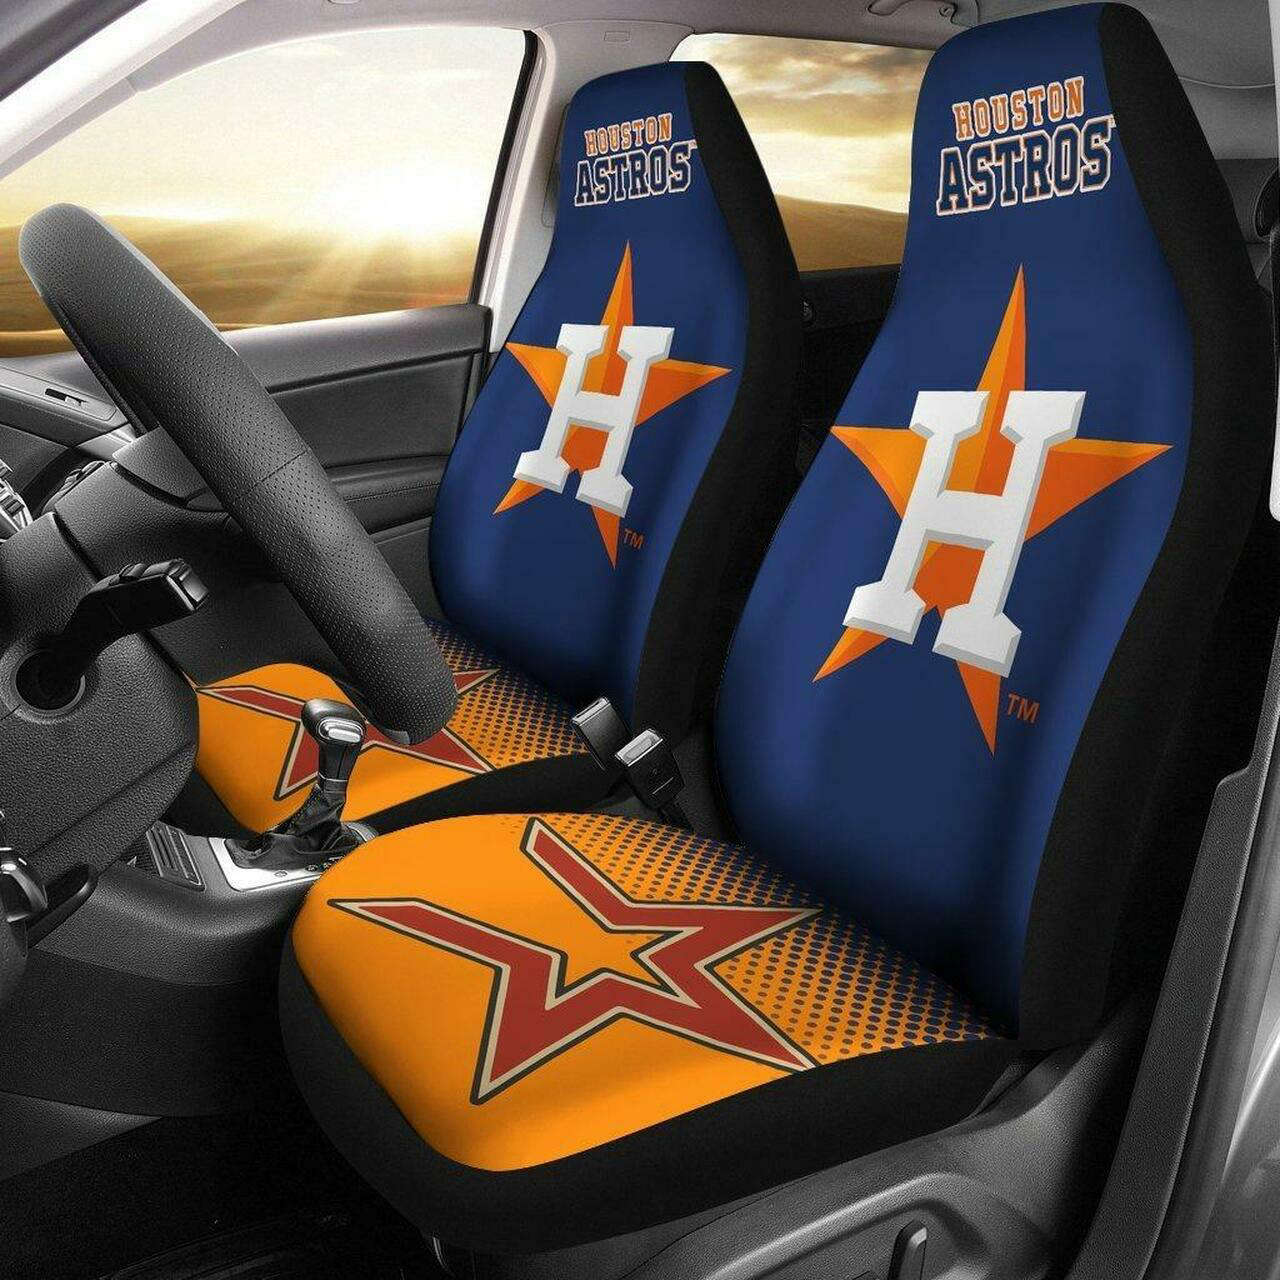 MLB Houston Astros Car Seat Covers – Stylish Fan Gifts for On-the-Go Team Essence